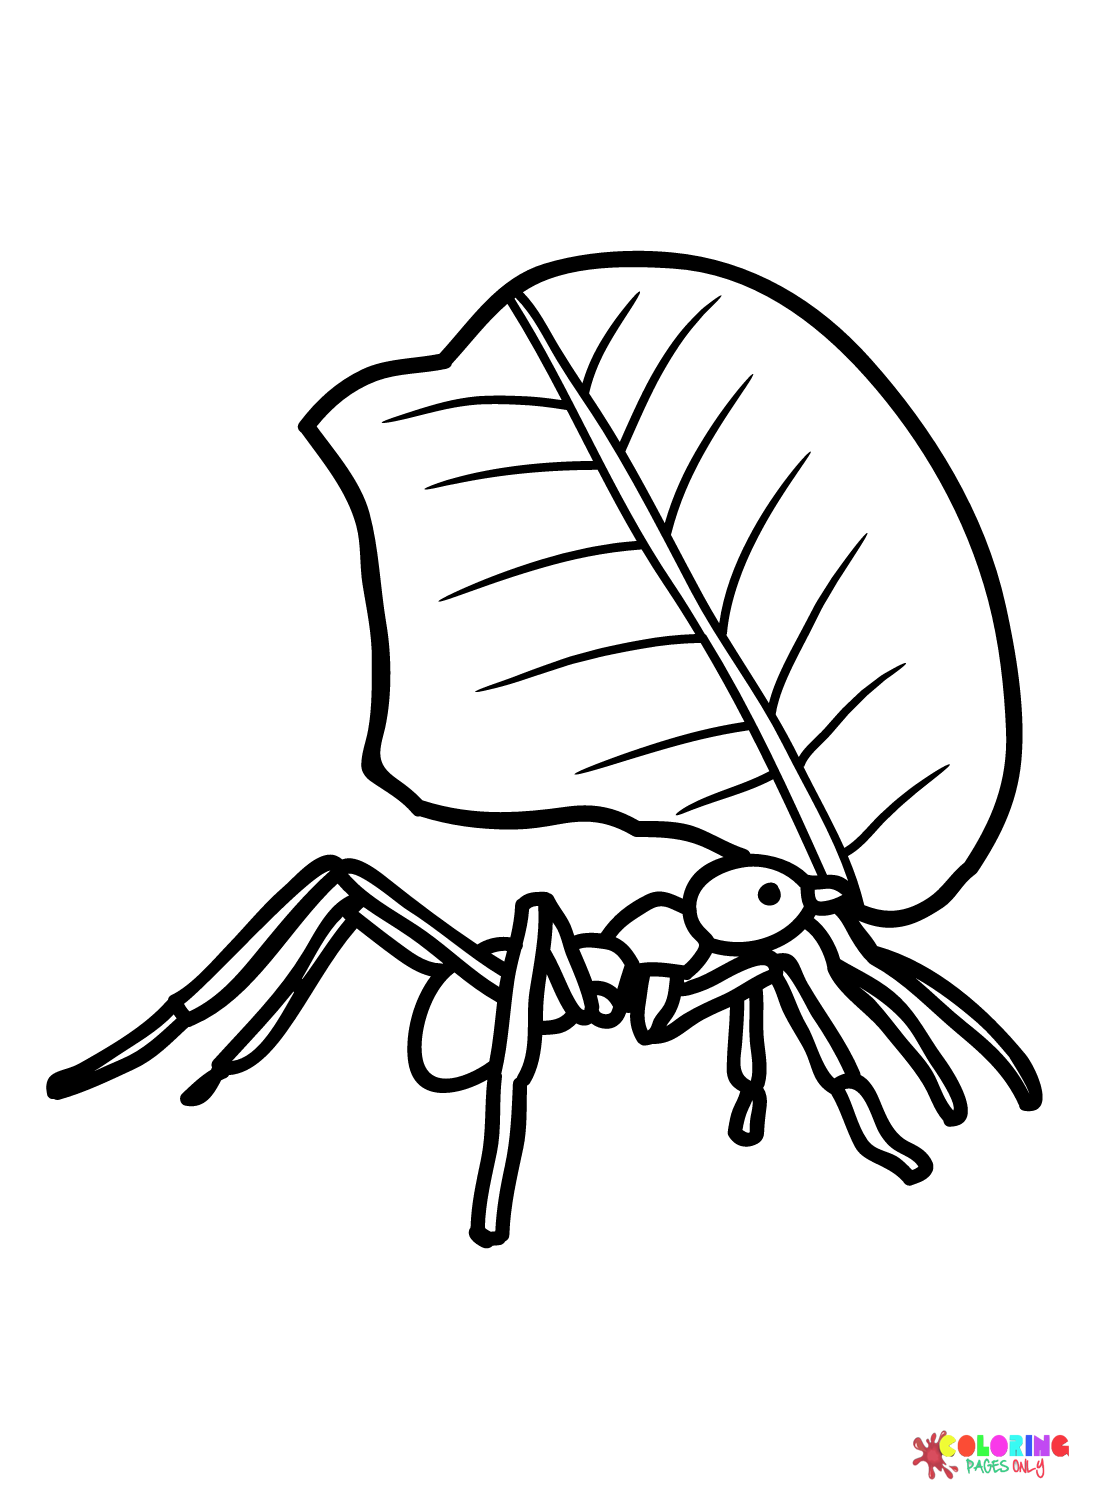 Leafcutter Ant Coloring Page